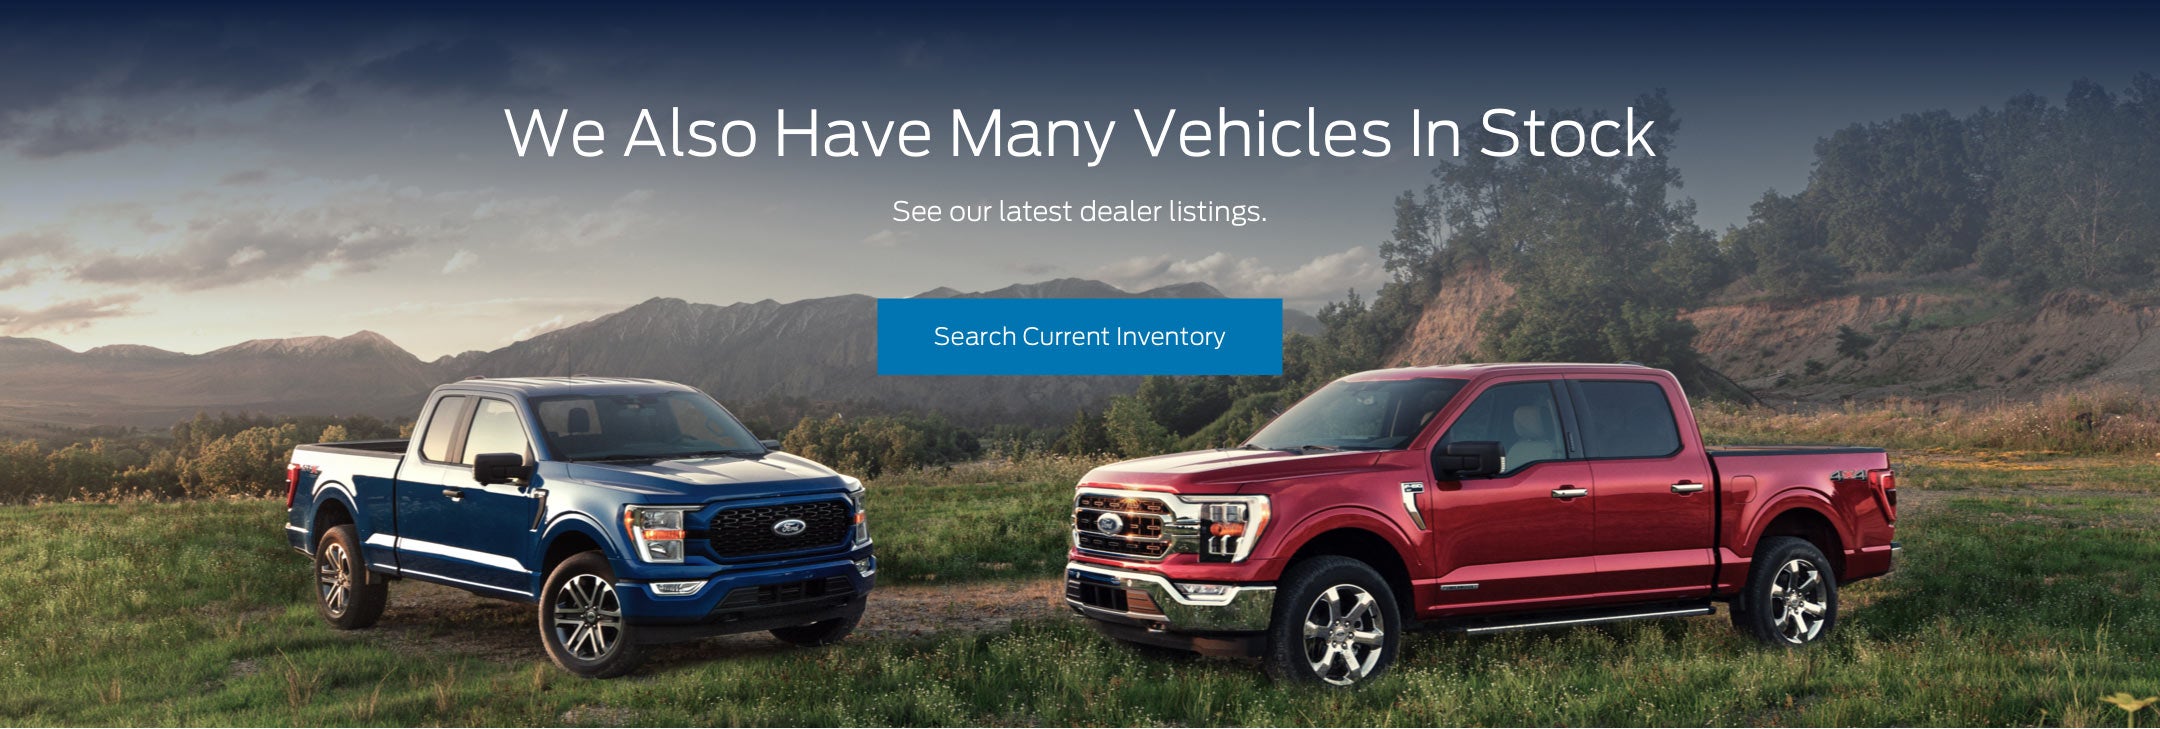 Ford vehicles in stock | Casa Ford of Las Cruces in Las Cruces NM